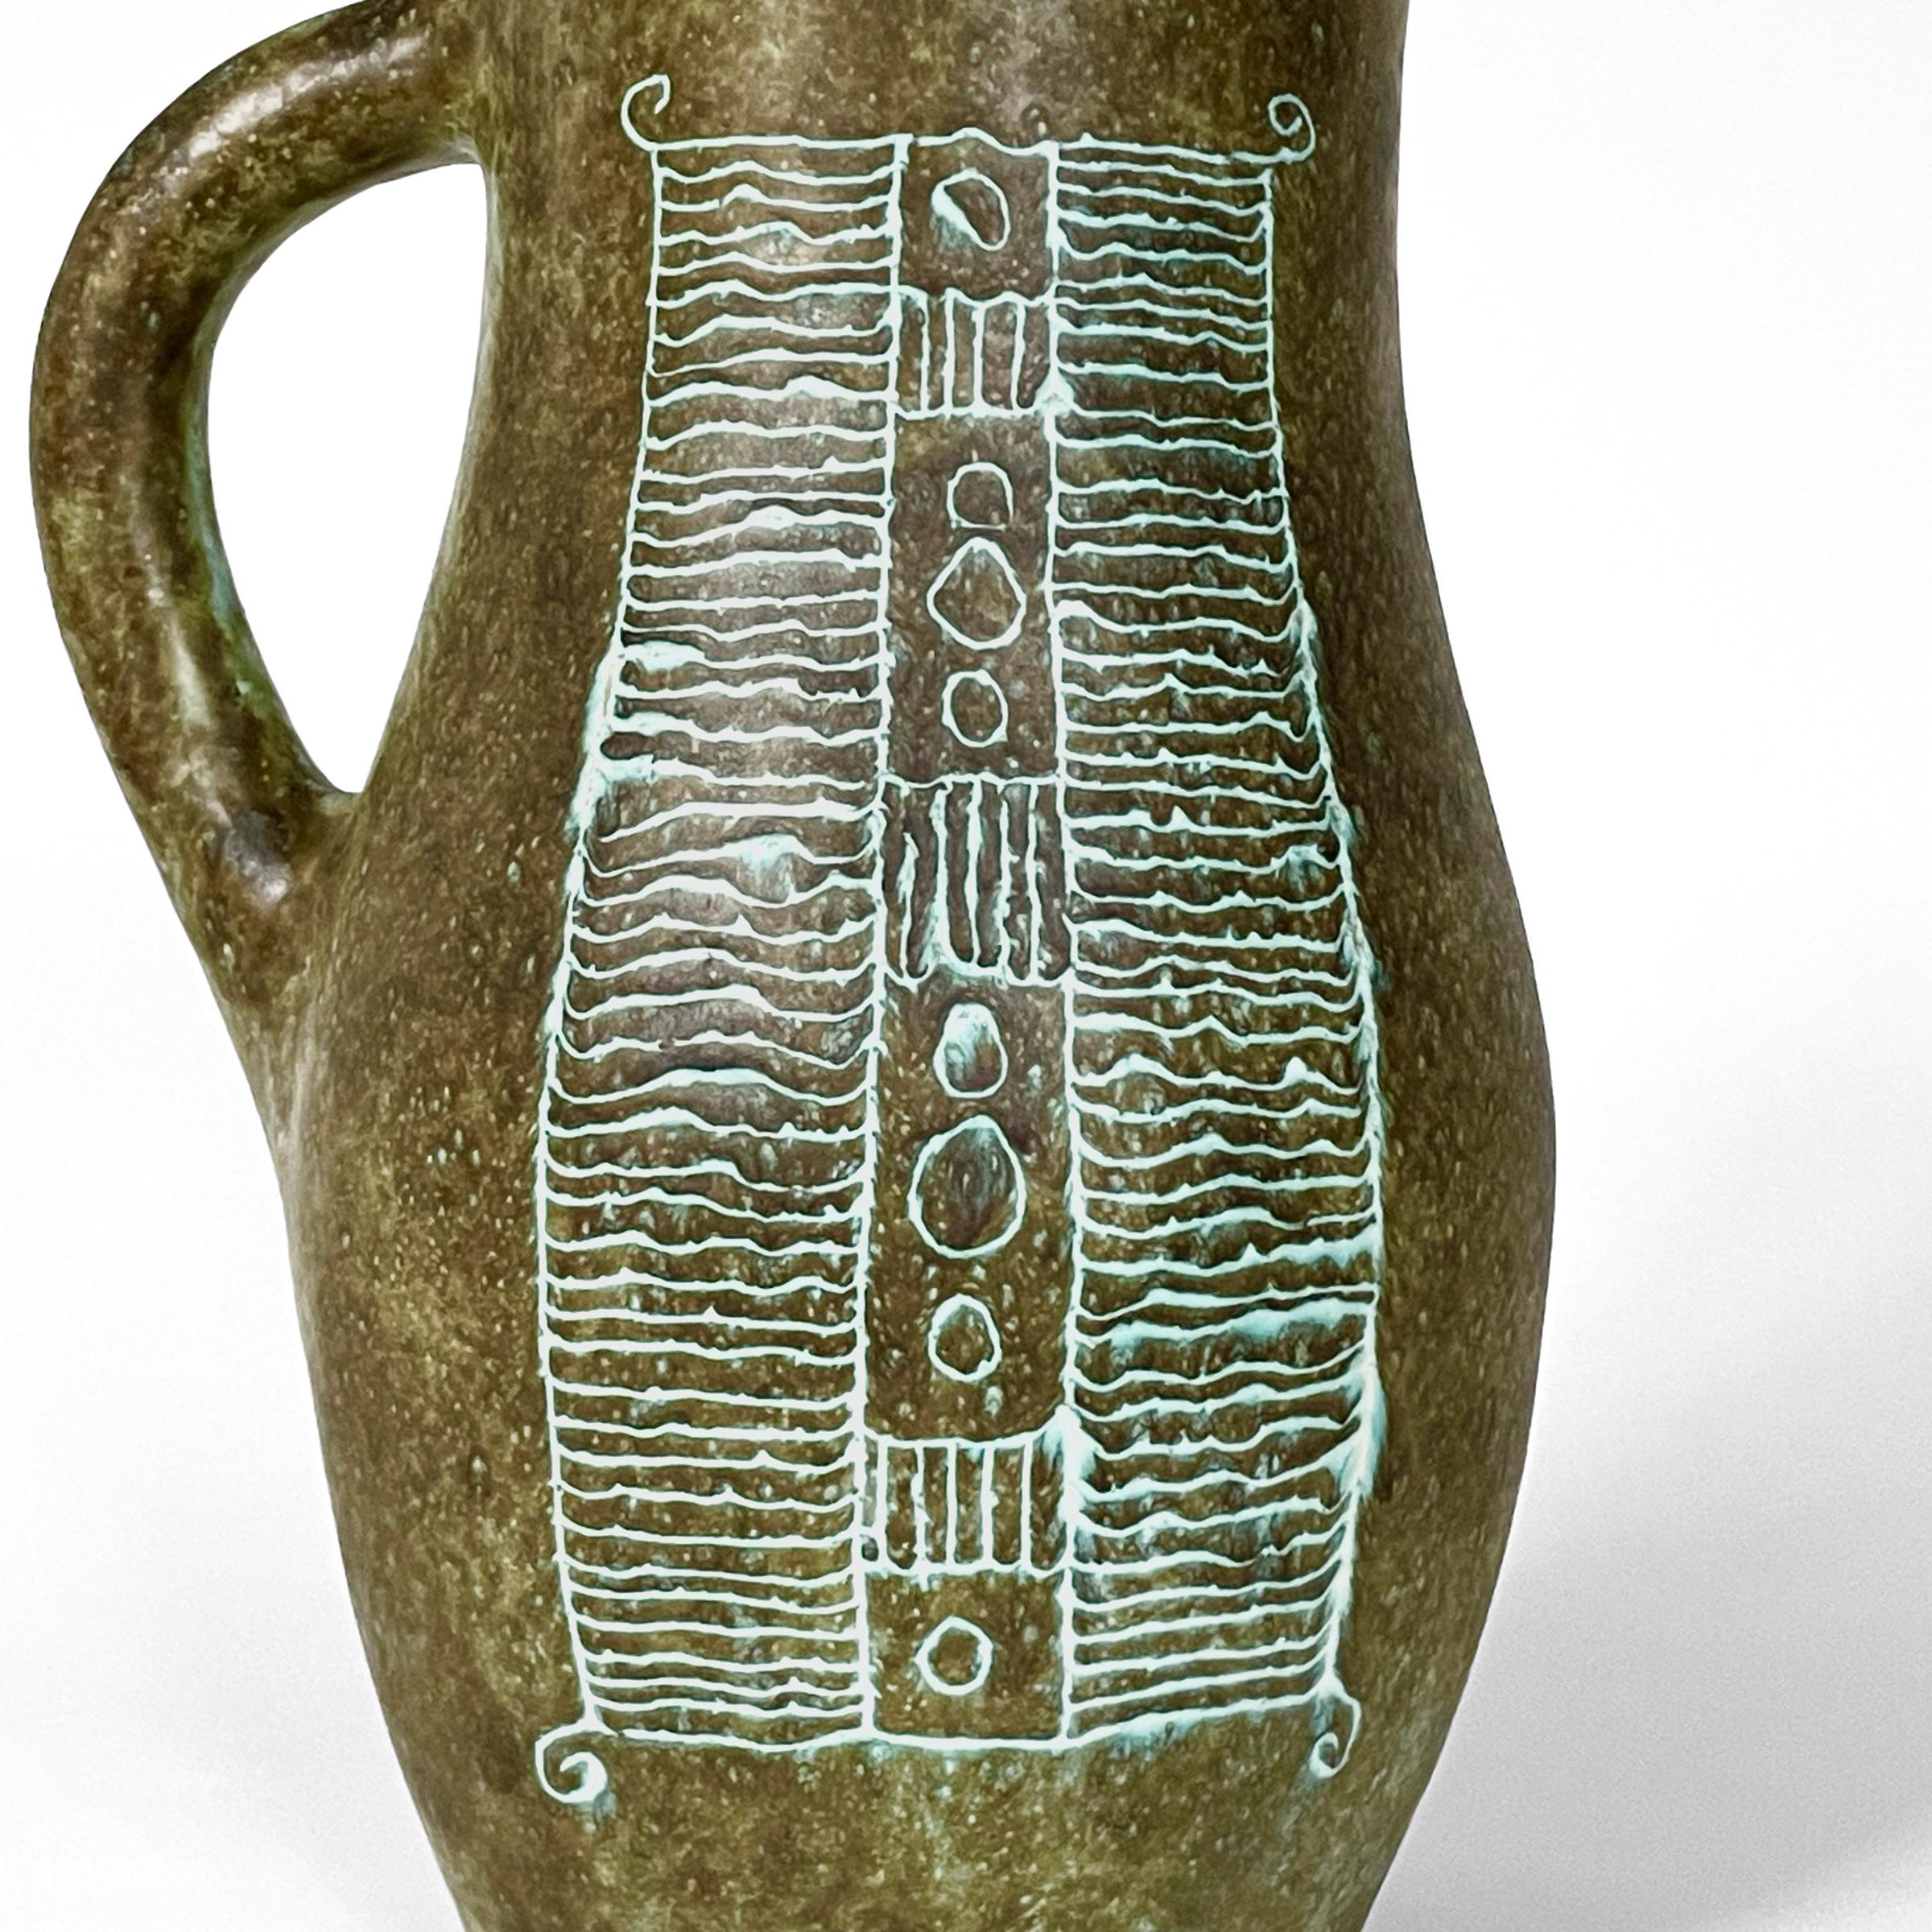 Ceramic pitcher by Jacques and Michelle Serre, Les 2 potiers, circa 1950 5